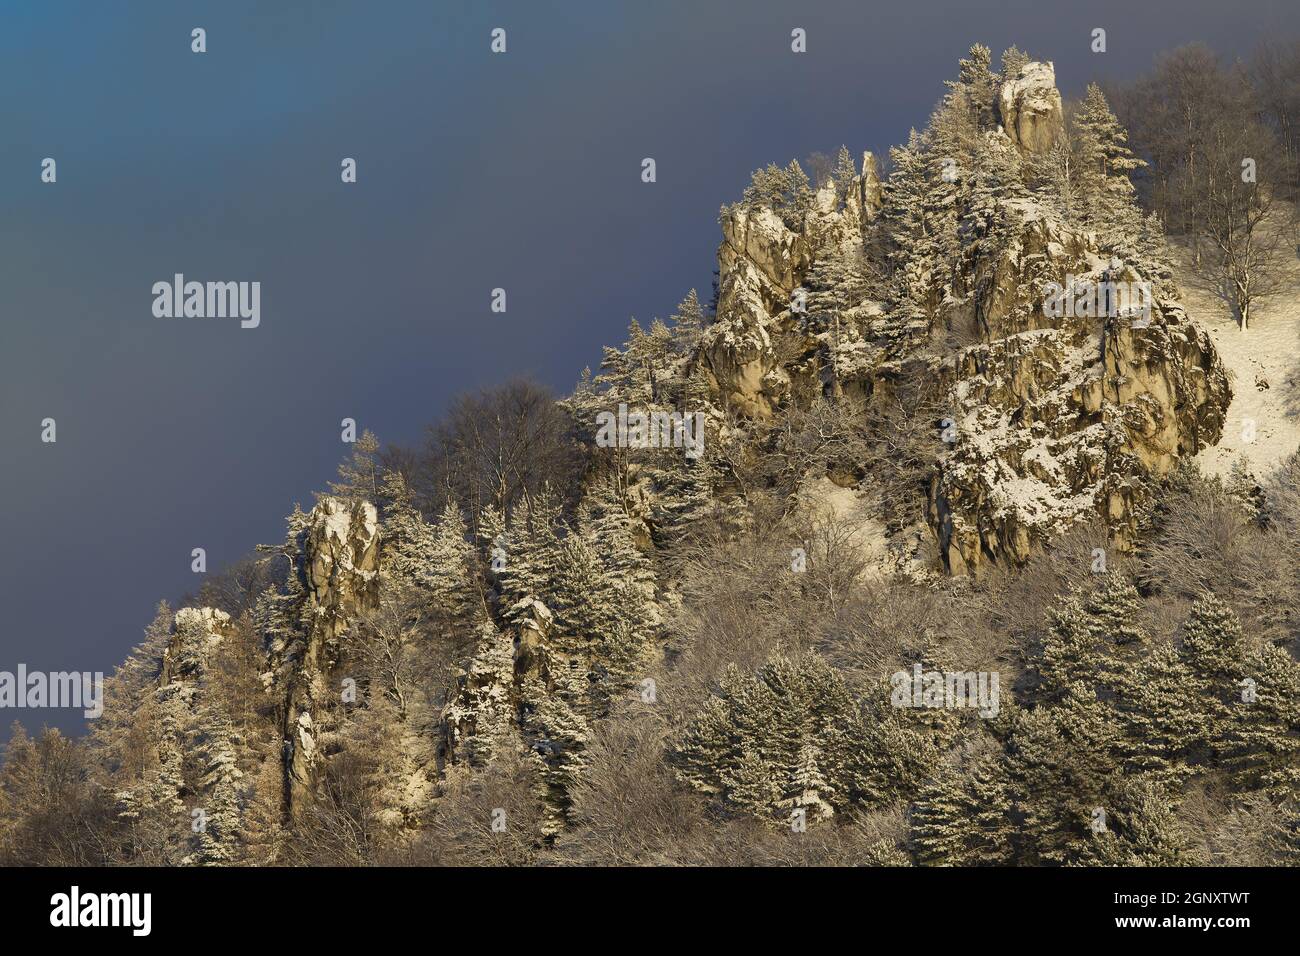 Rocky hill side with pine trees growing on it covered with snow in winter sunlit by evening light. Nature scenery with steep slope frosted by cold wea Stock Photo